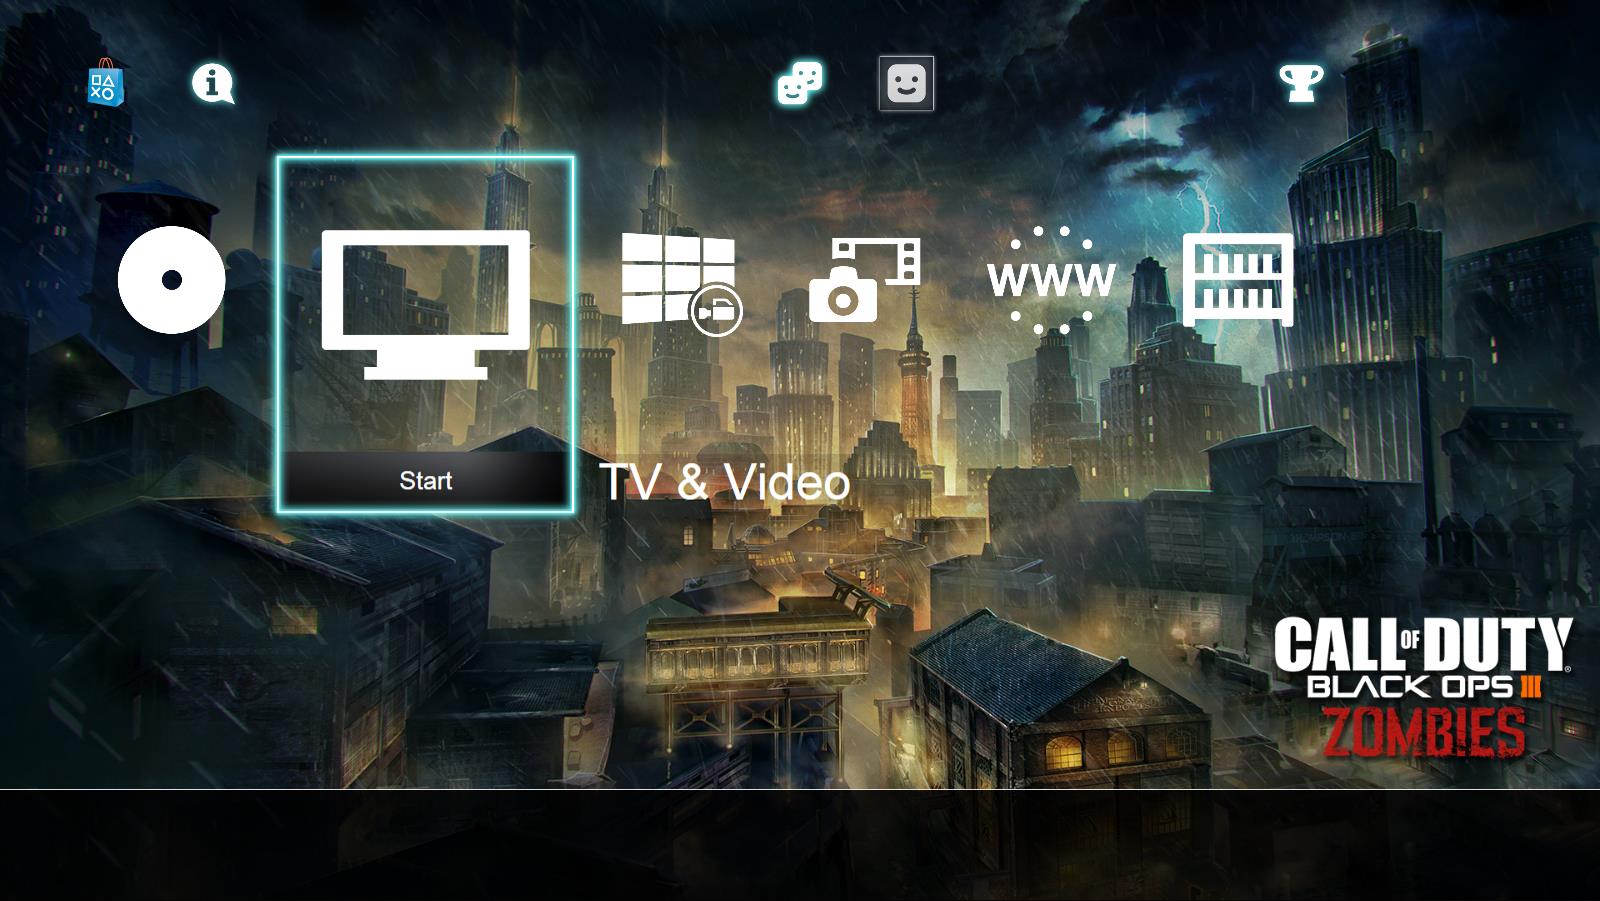 The Black Ops Beta On Ps4 Get Zombies Theme And A Calling Card